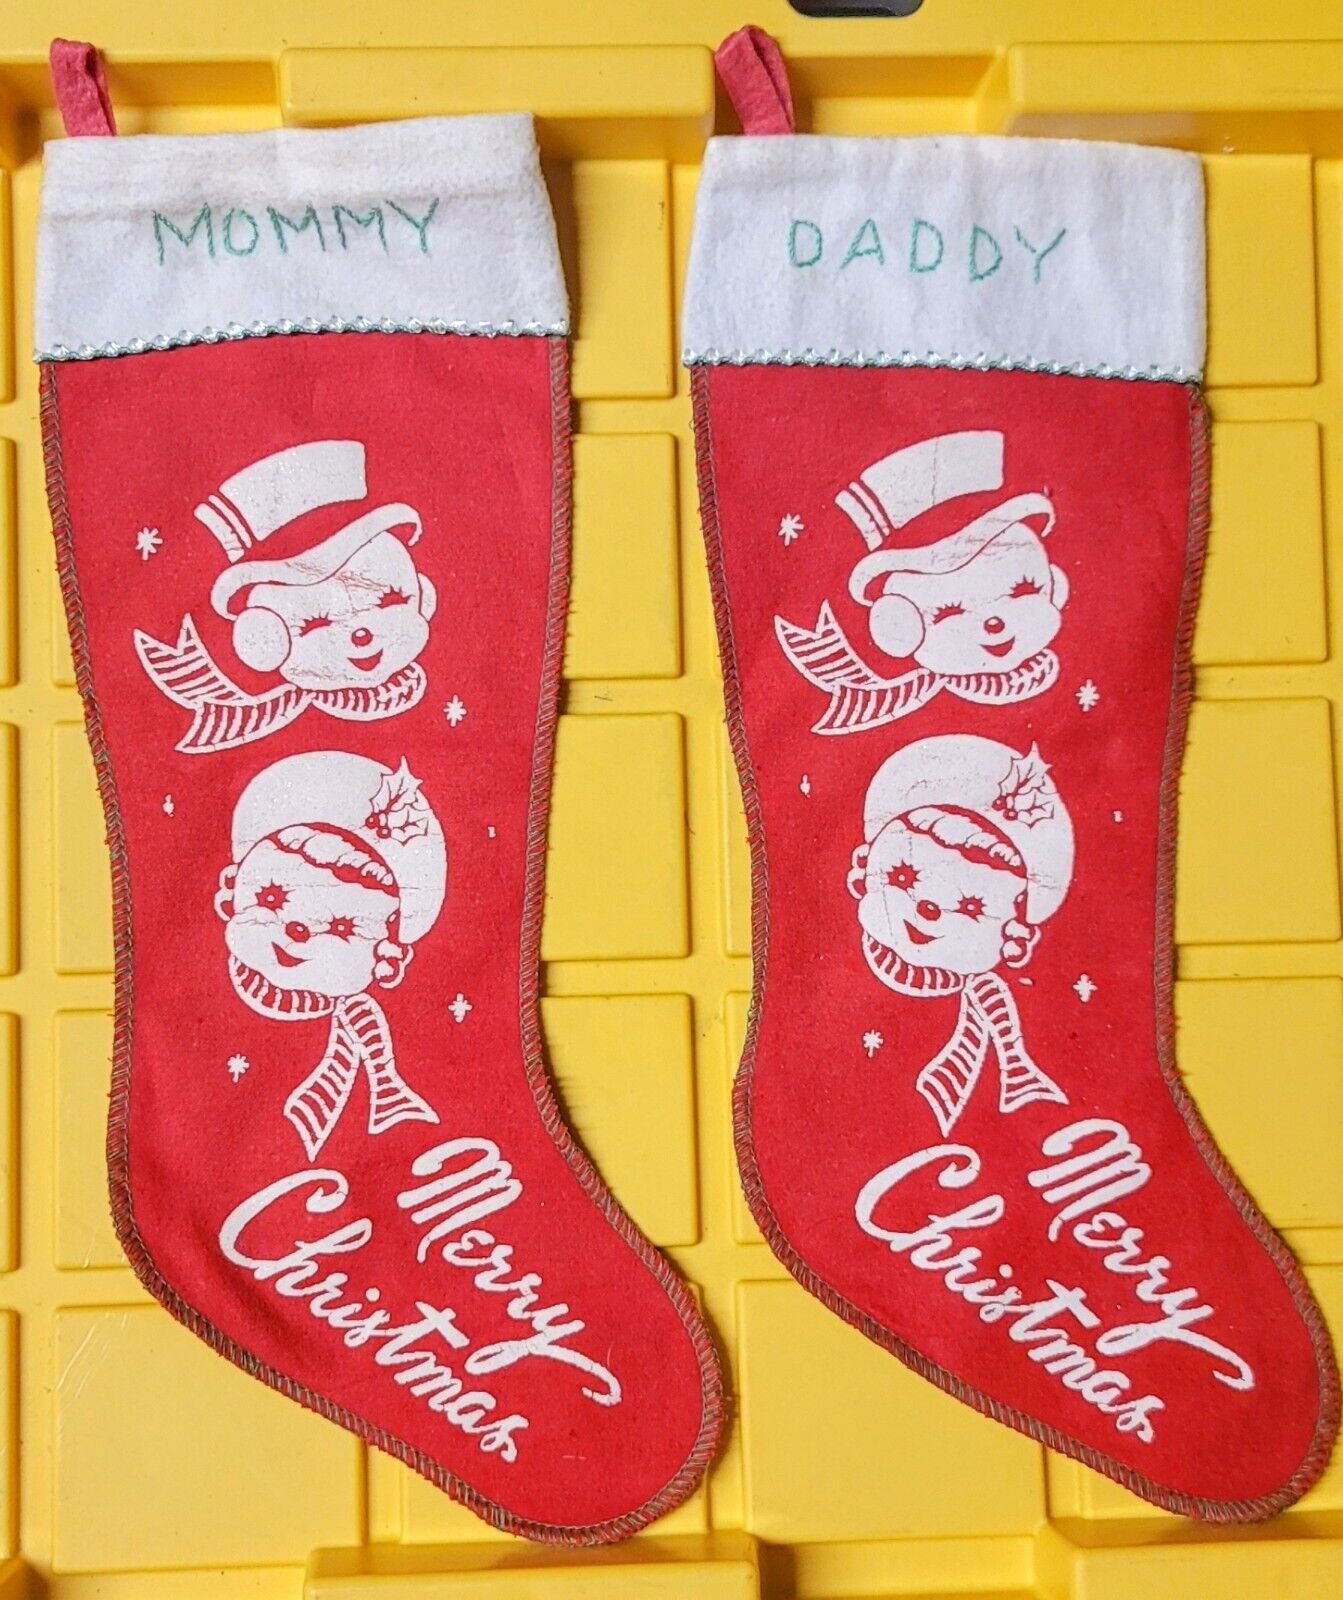  2 Vintage (1950s, 1960s) Felt Stenciled Christmas Stockings - Mommy Daddy